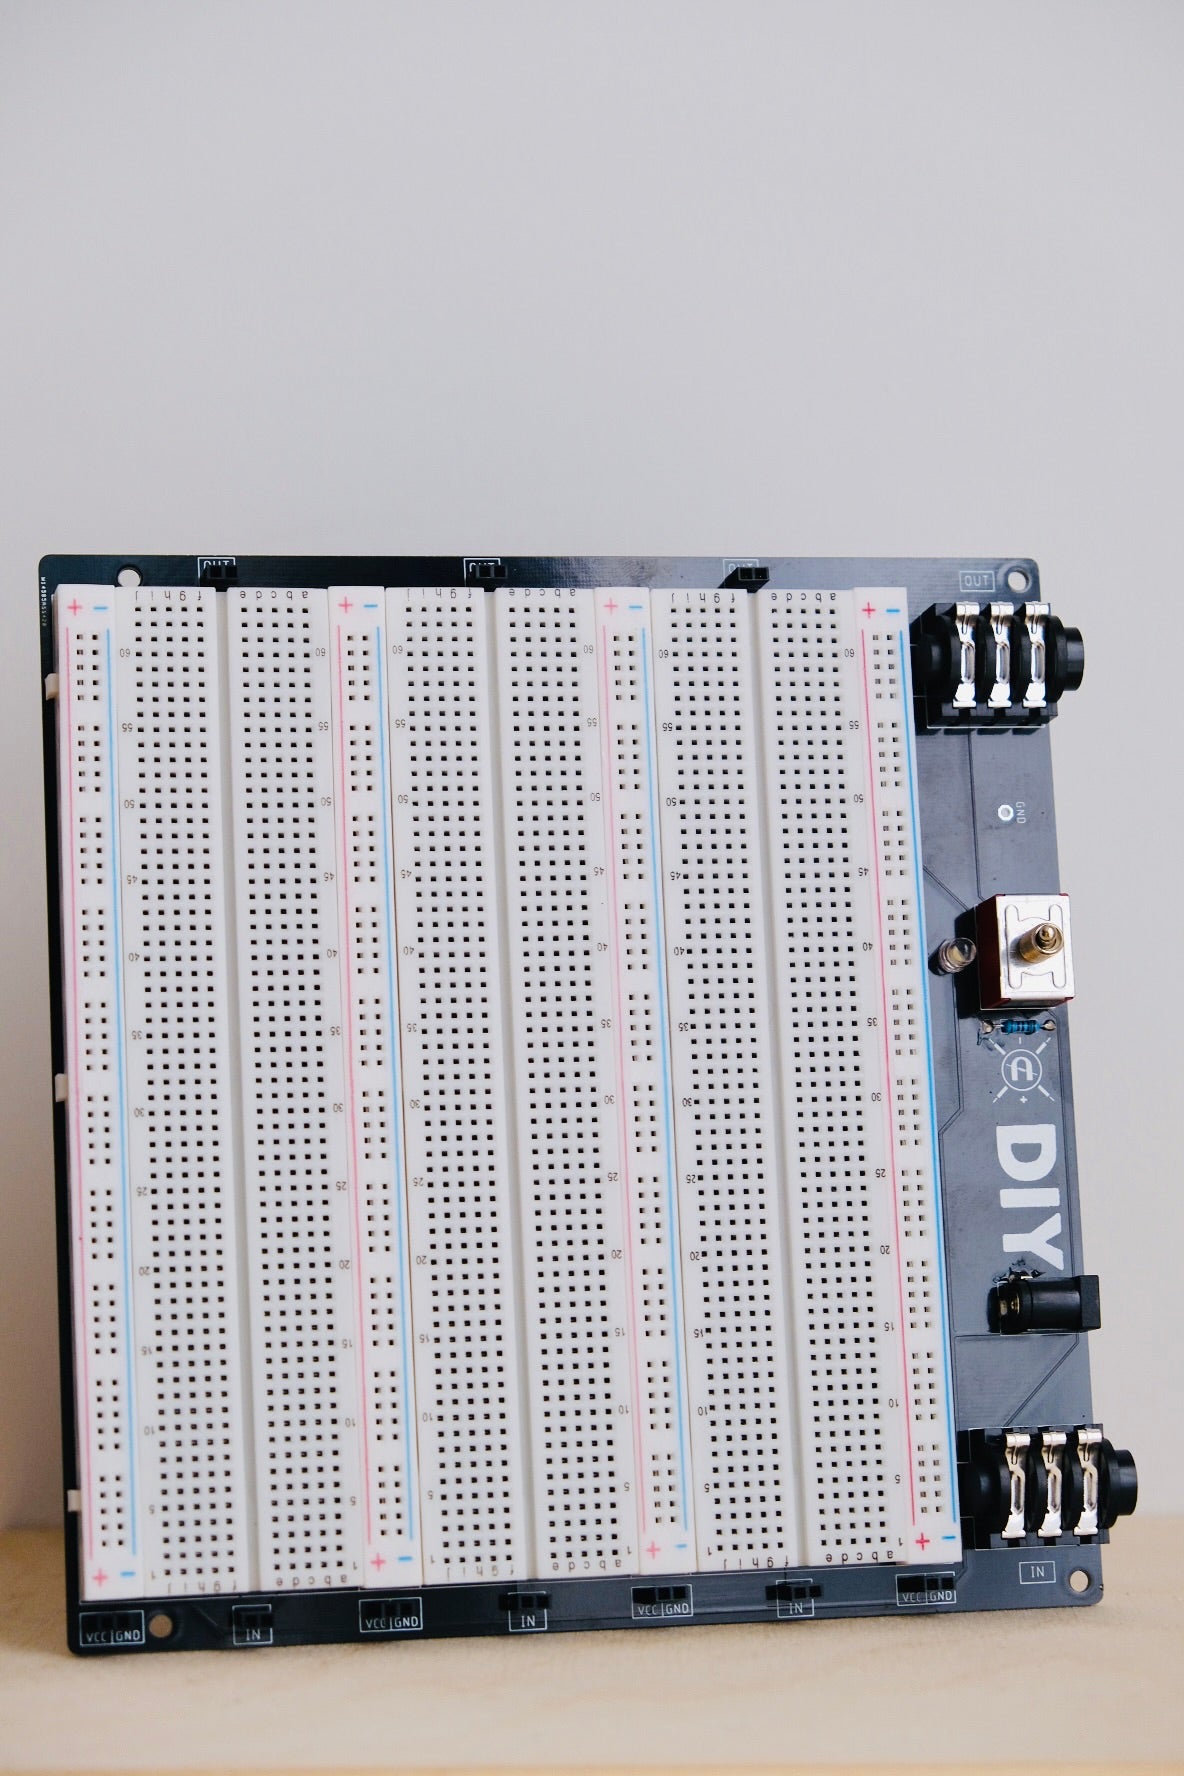 Coppersound DIY Large Breadboard